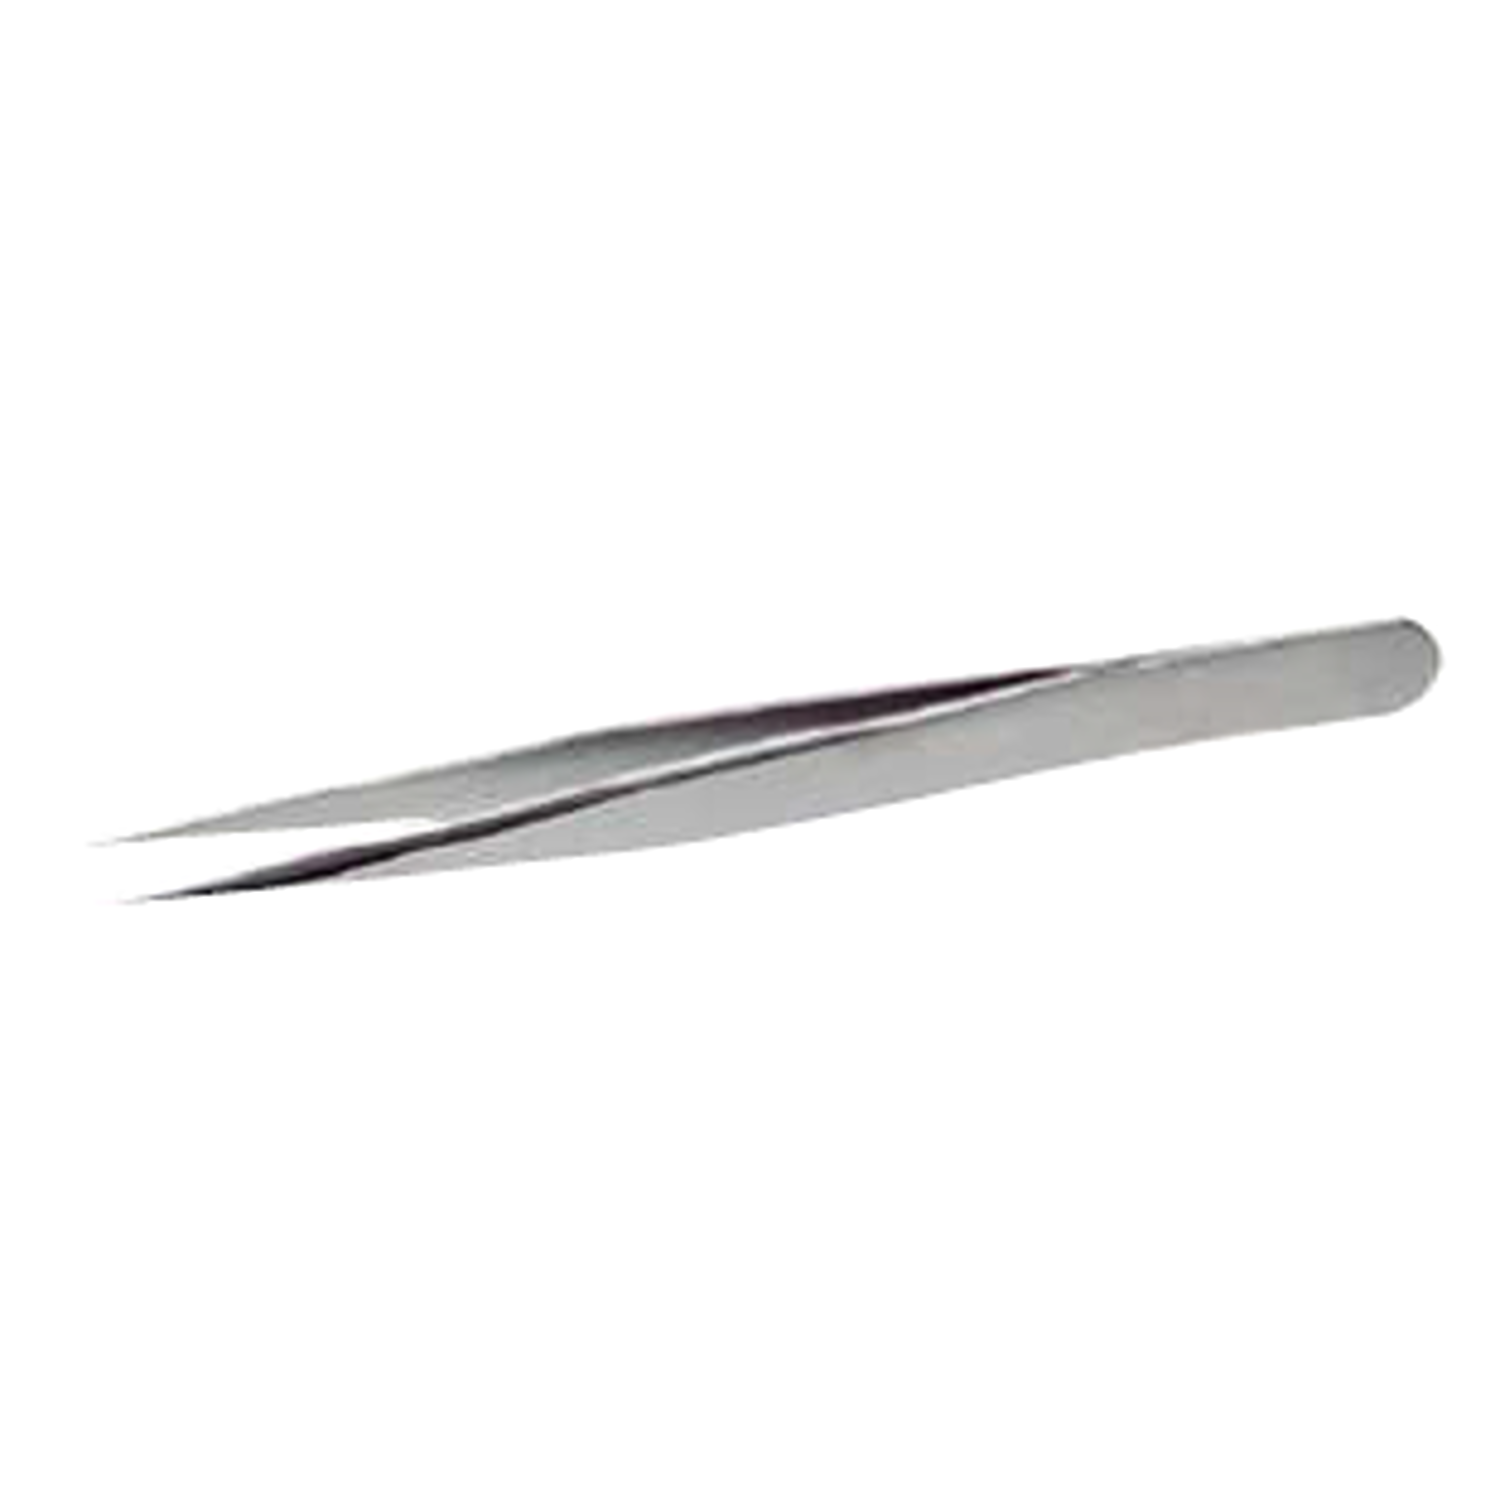 BAHCO TL 3C-SA High Precision Tweezers with Very Sharp Tips 110mm - Premium Tweezers from BAHCO - Shop now at Yew Aik.